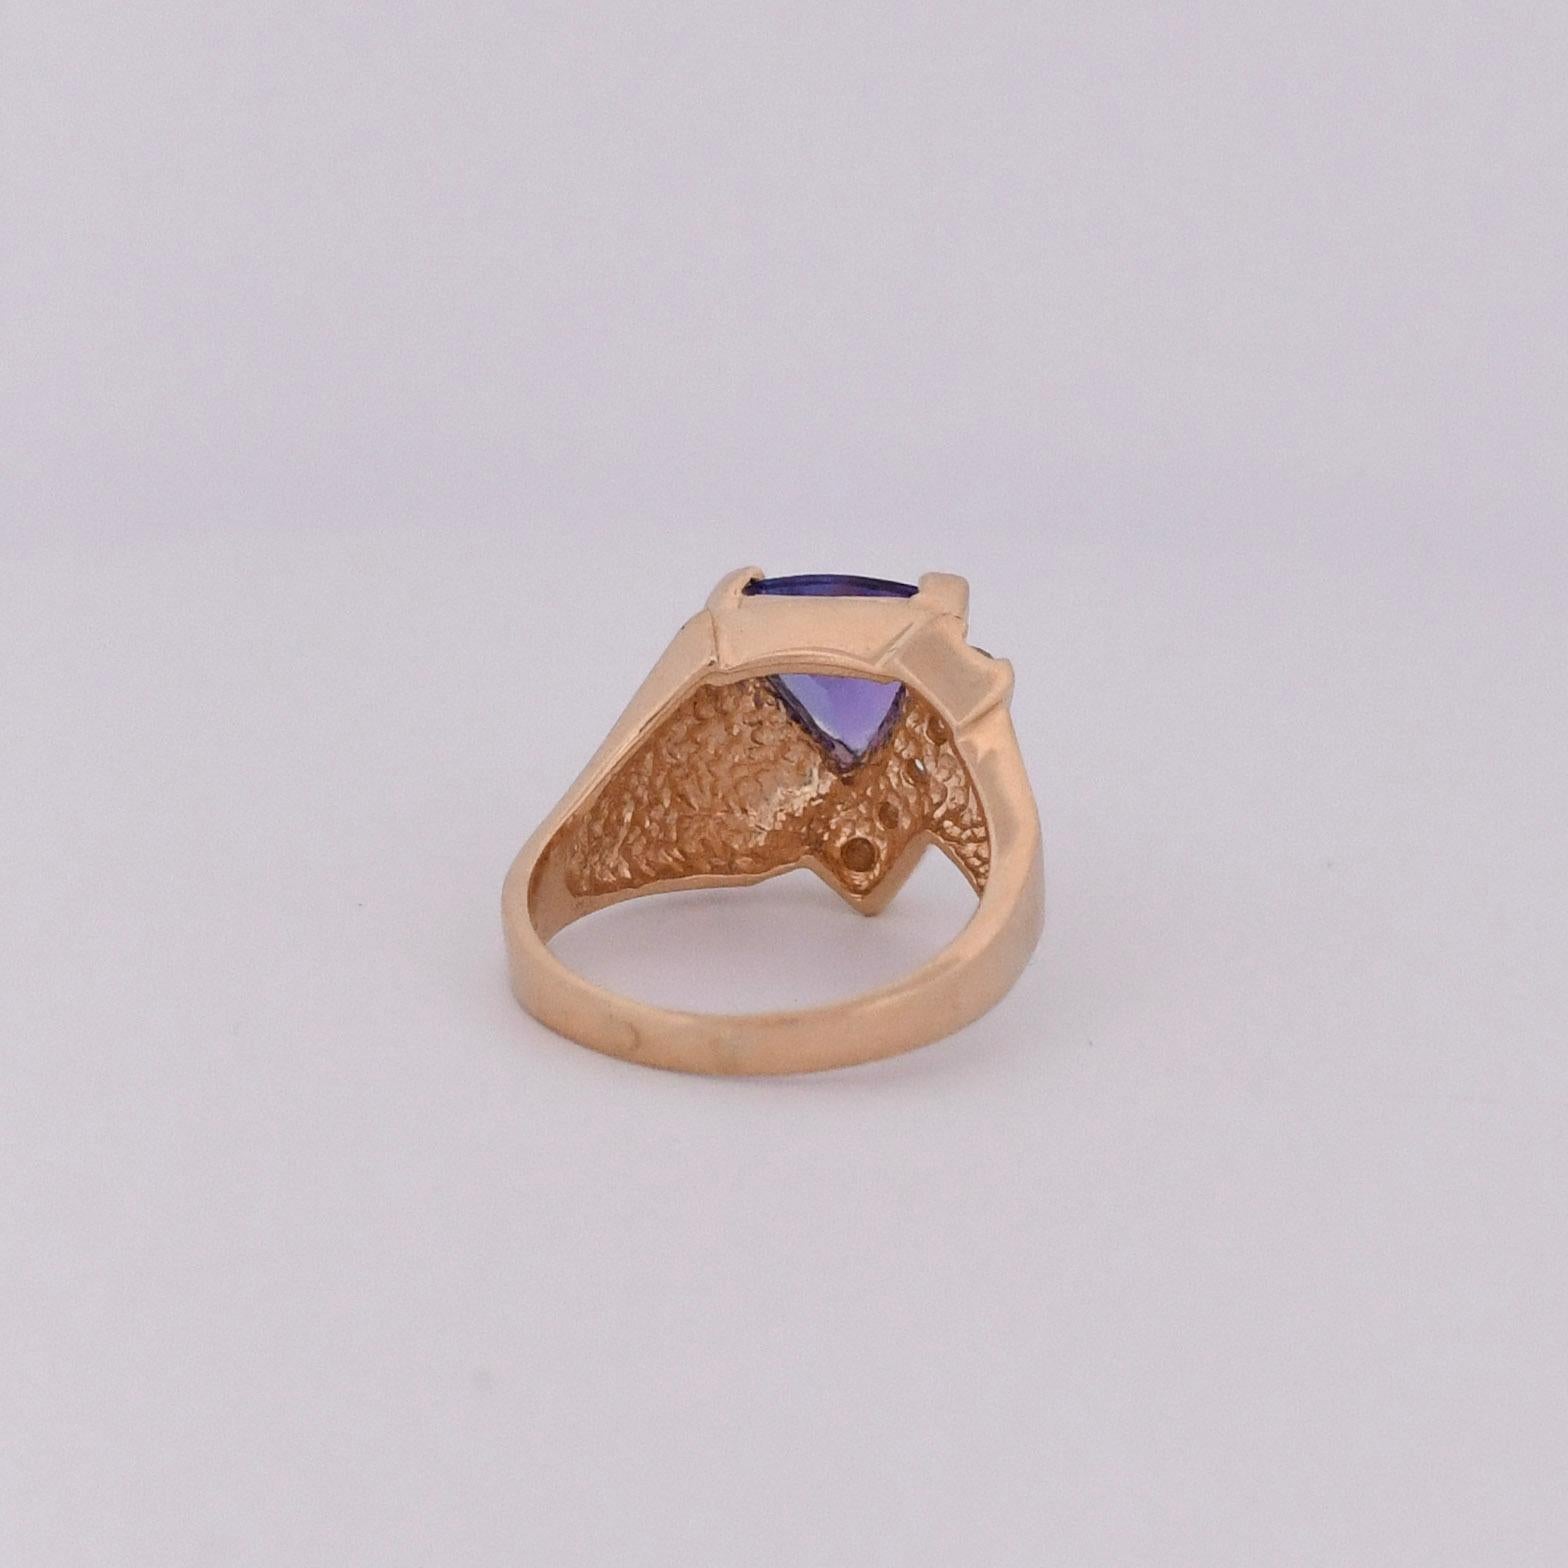 Vintage 14K Yellow Gold Diamond and Deep Purple Tanzanite Gemstone Ring In Good Condition For Sale In Addison, TX